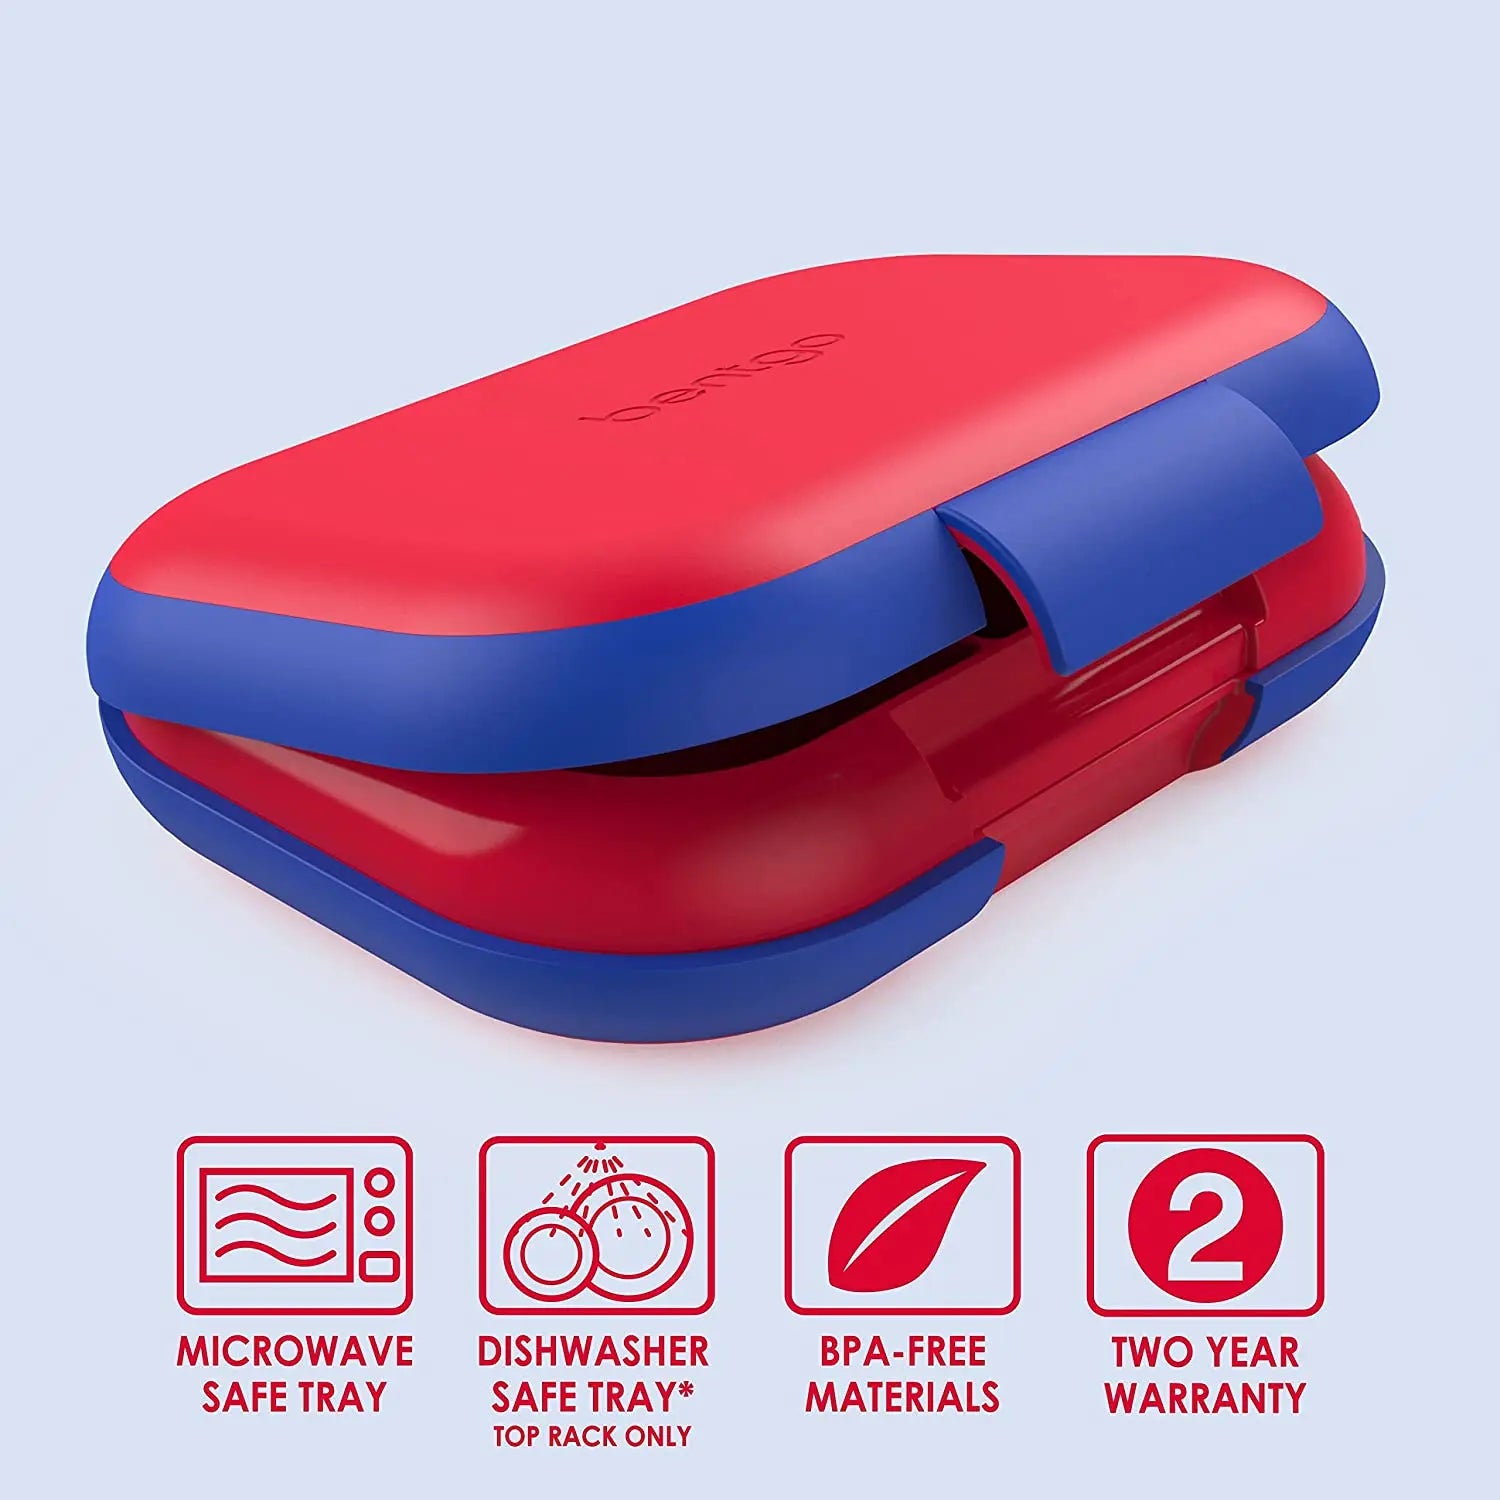 Bentgo® Kids Chill Lunch Box - with Removable Ice Pack (Red) –  GreenLifeHuman Emporium